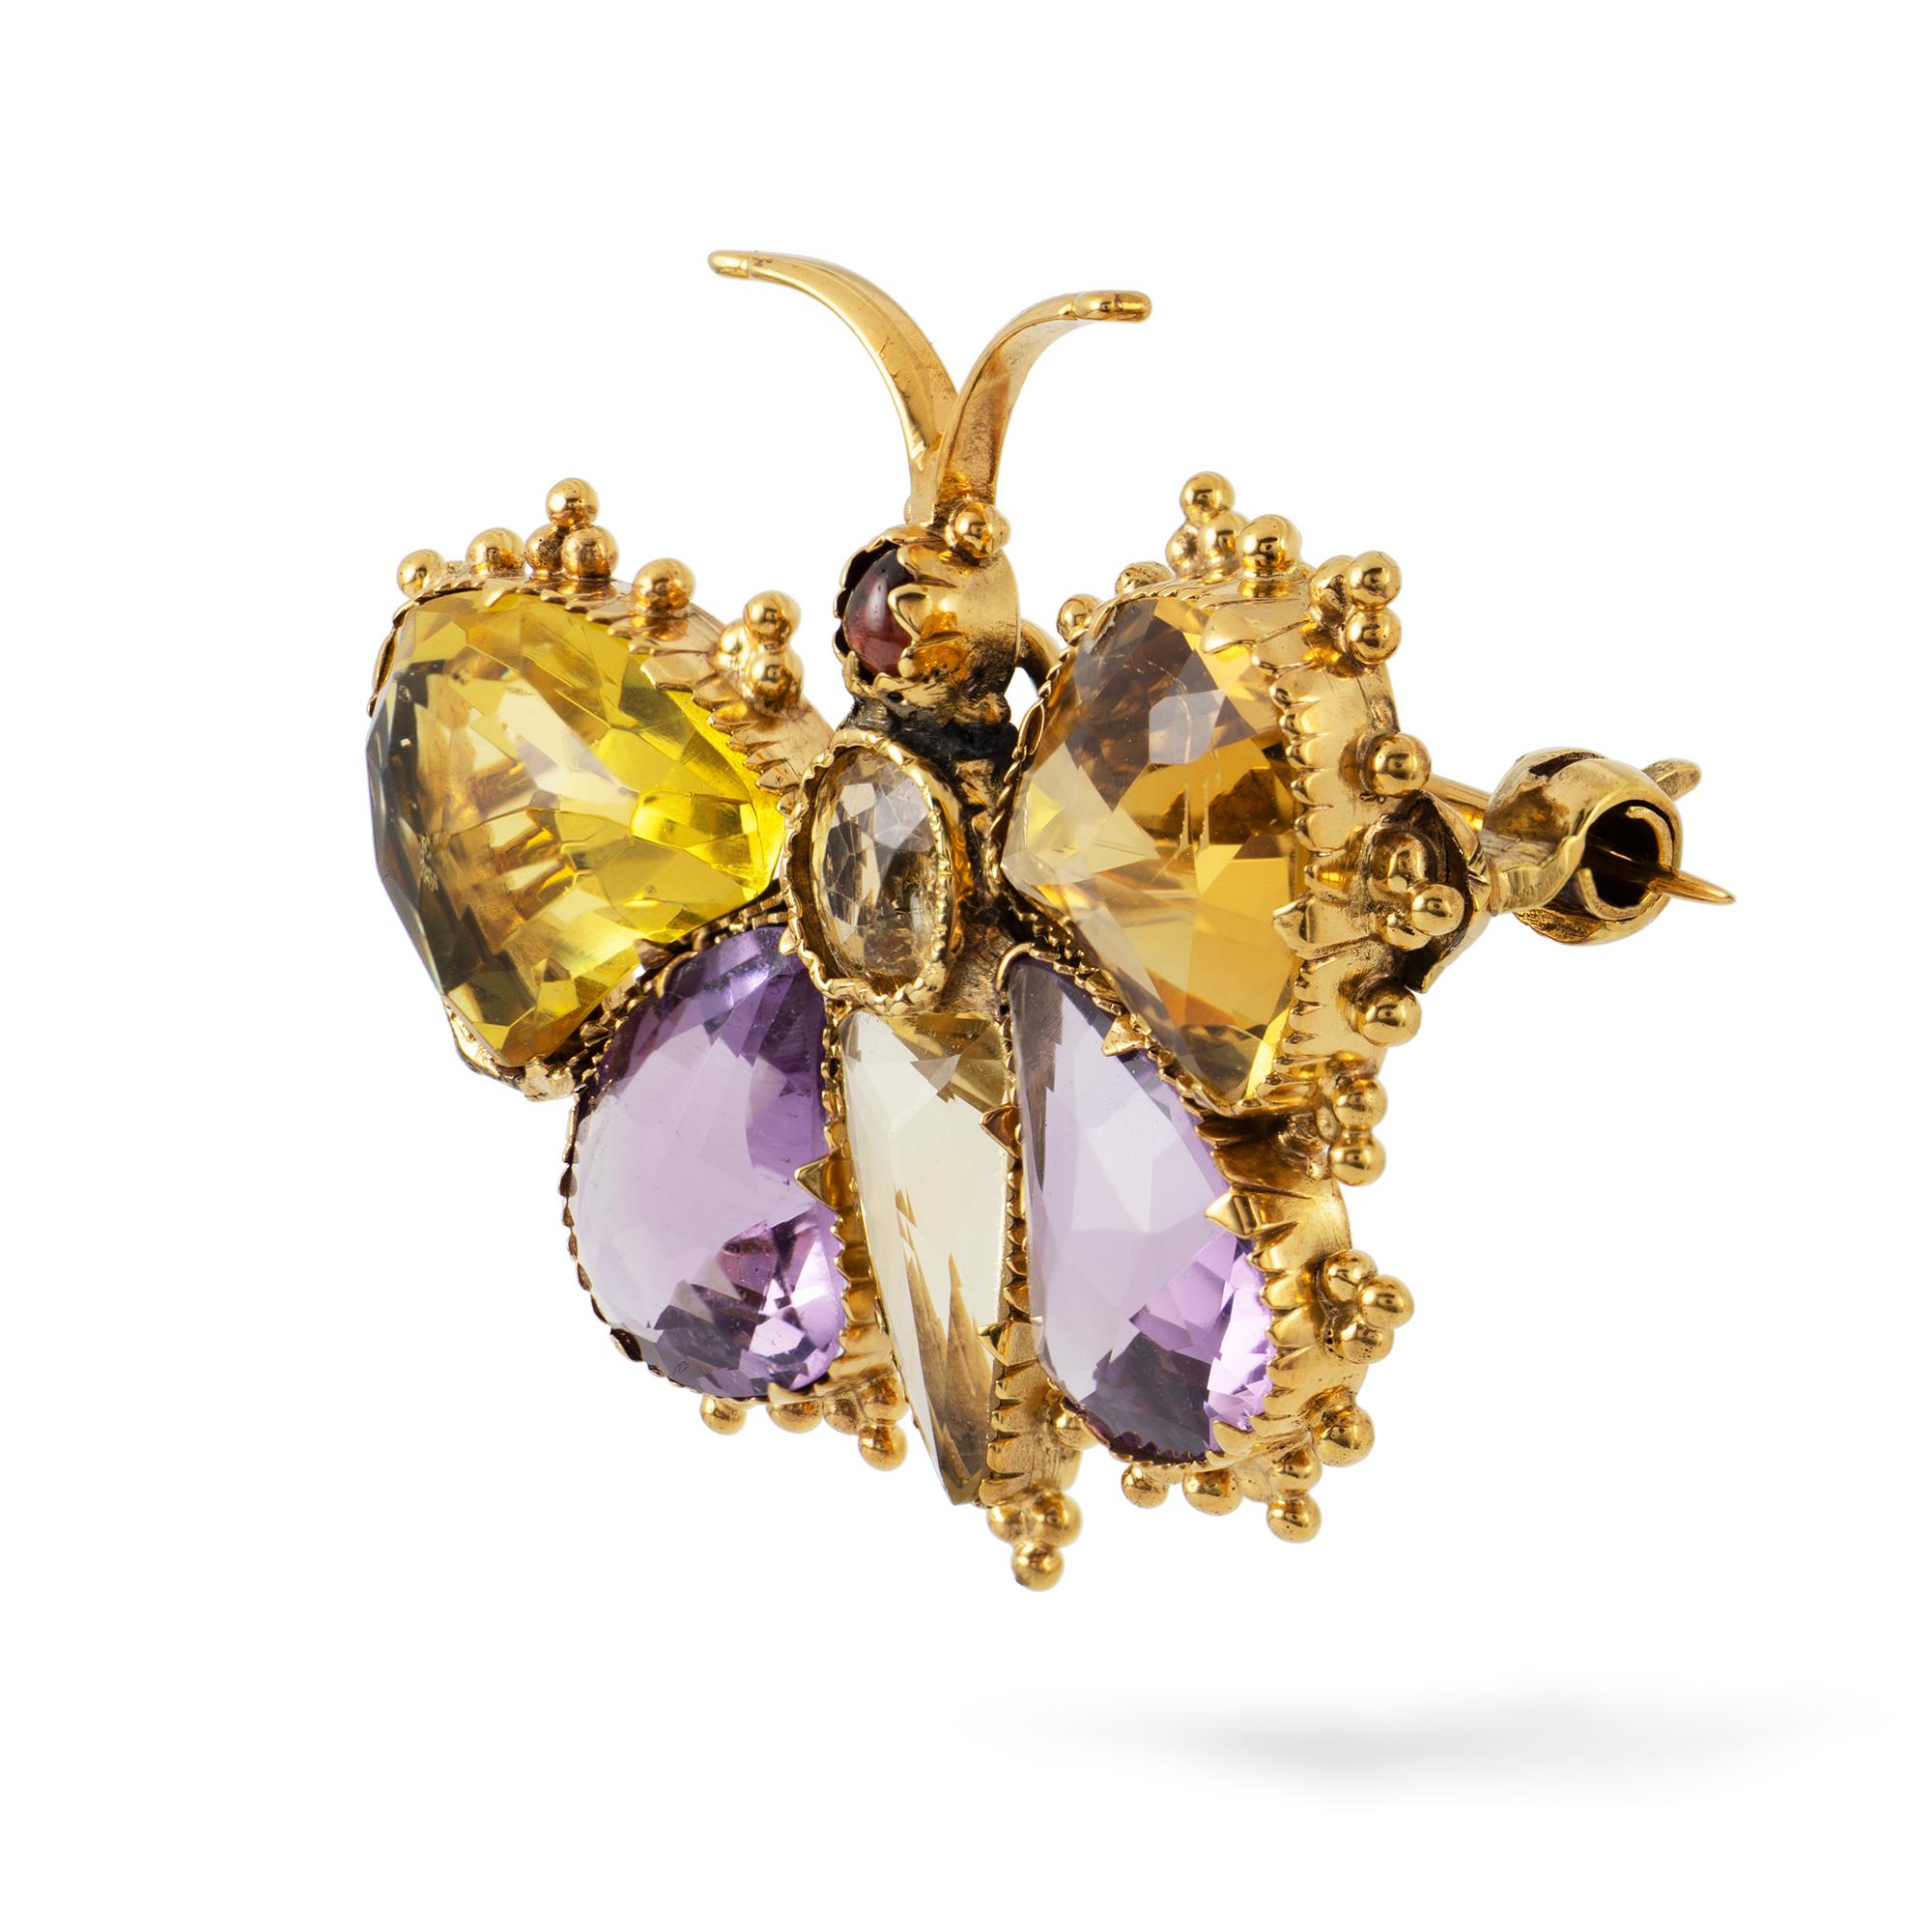 A Regency yellow gold and gemset butterfly brooch, the butterfly comprising amethyst- and citrine-set double wings, with citrine body and garnet head, all set to a yellow gold mount with beaded decoration to the sides, circa 1820, measures